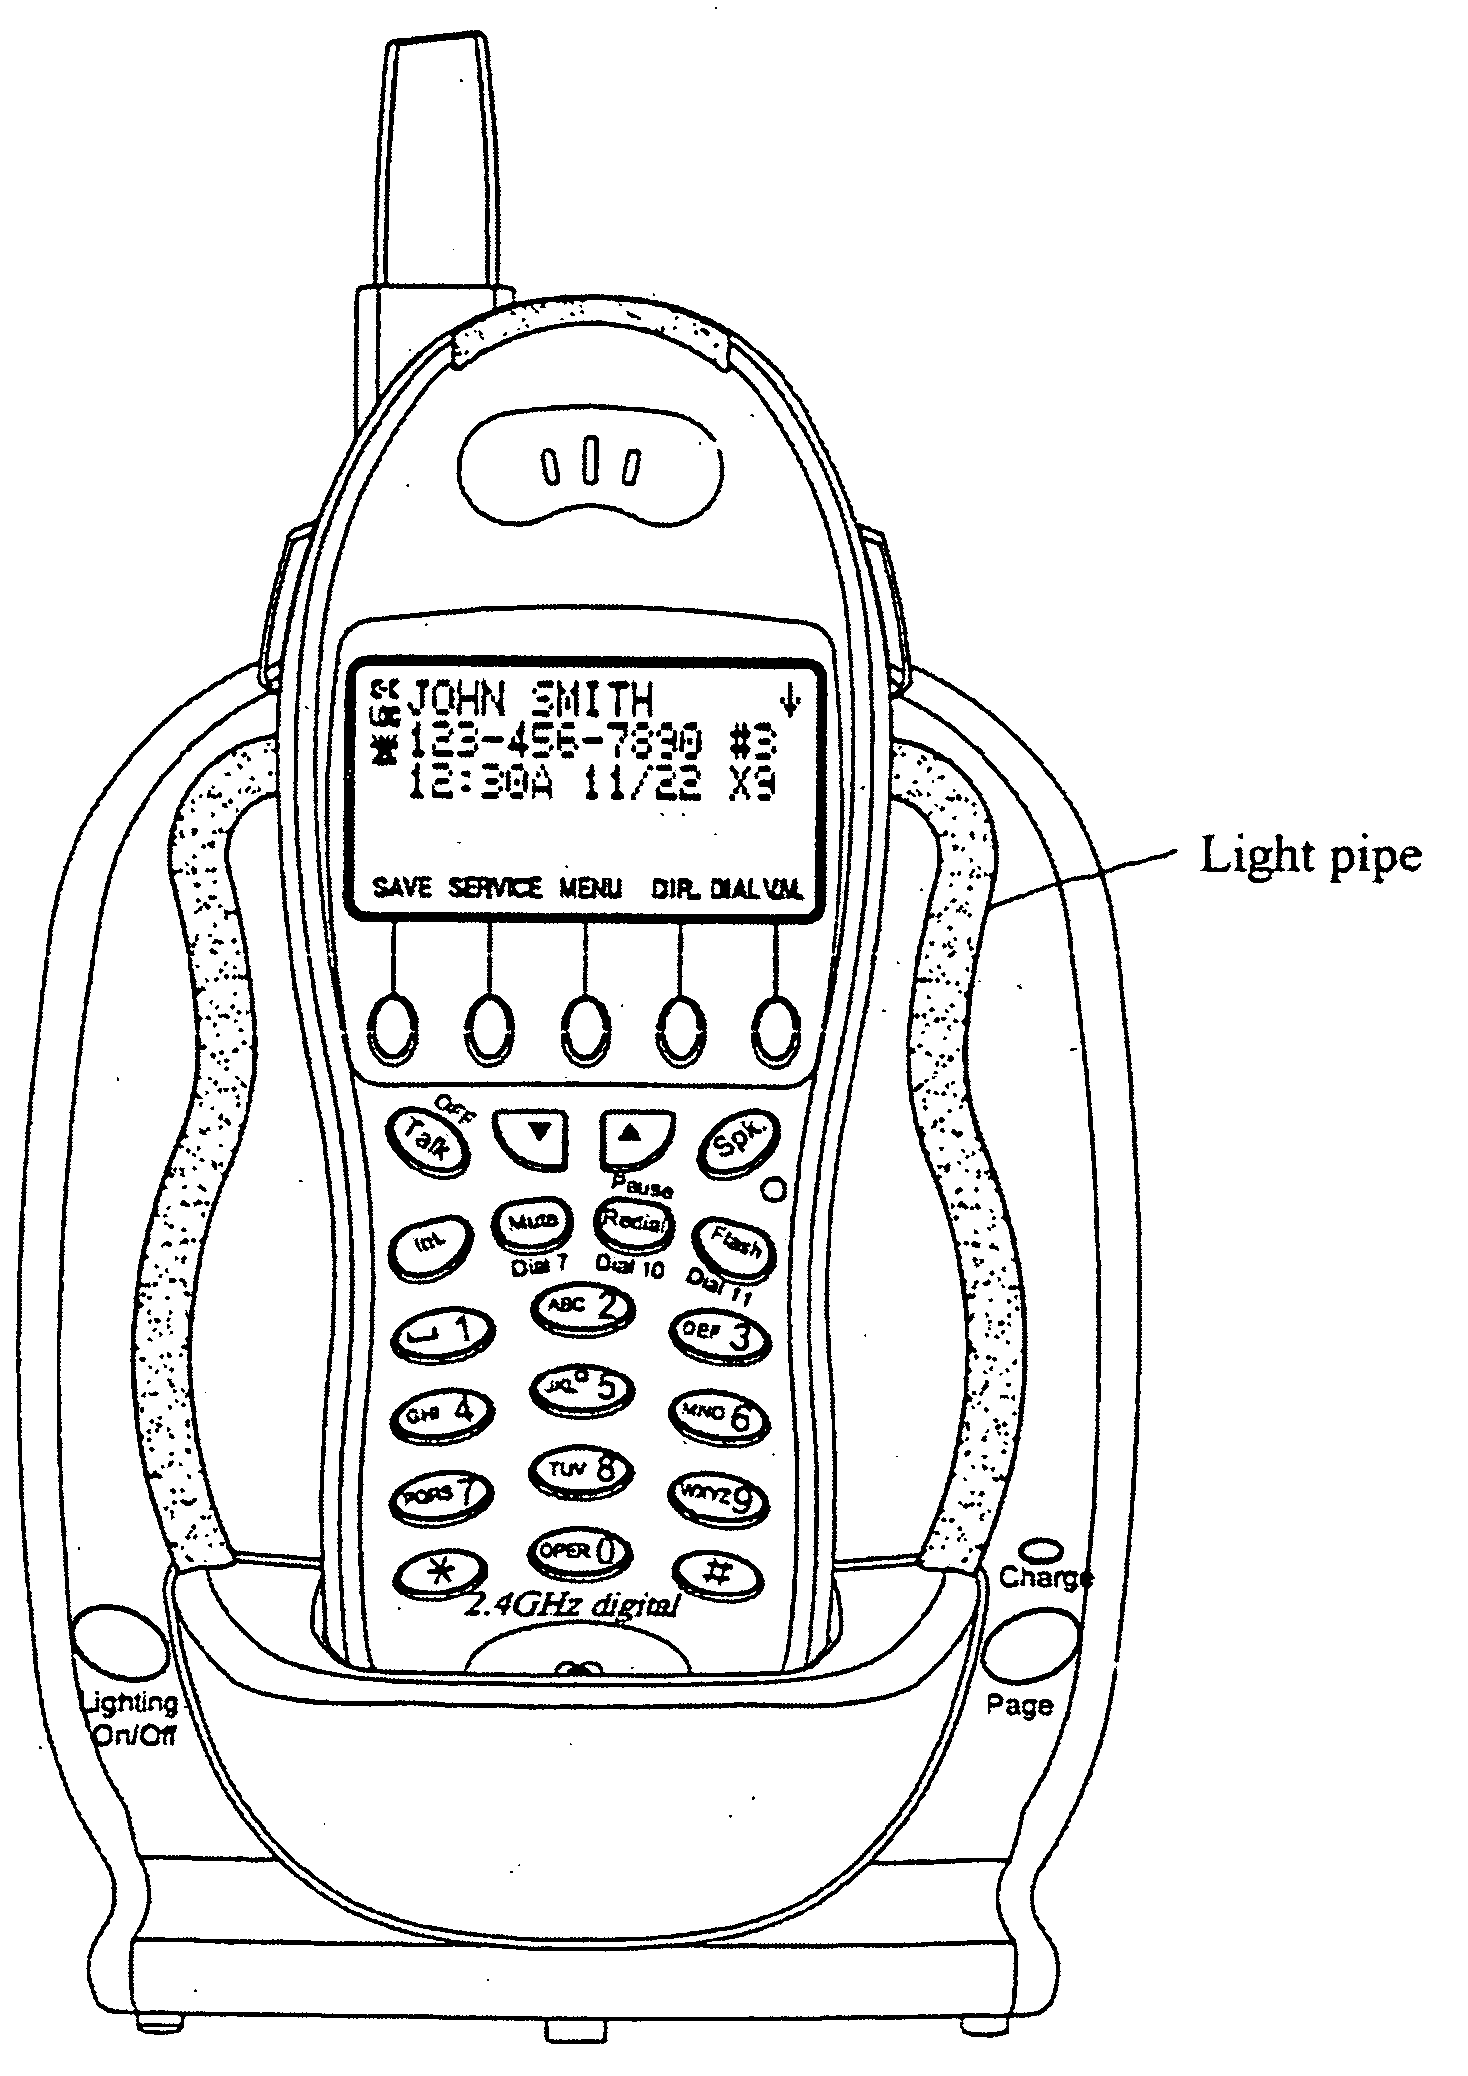 Telephone device with ornamental lighting